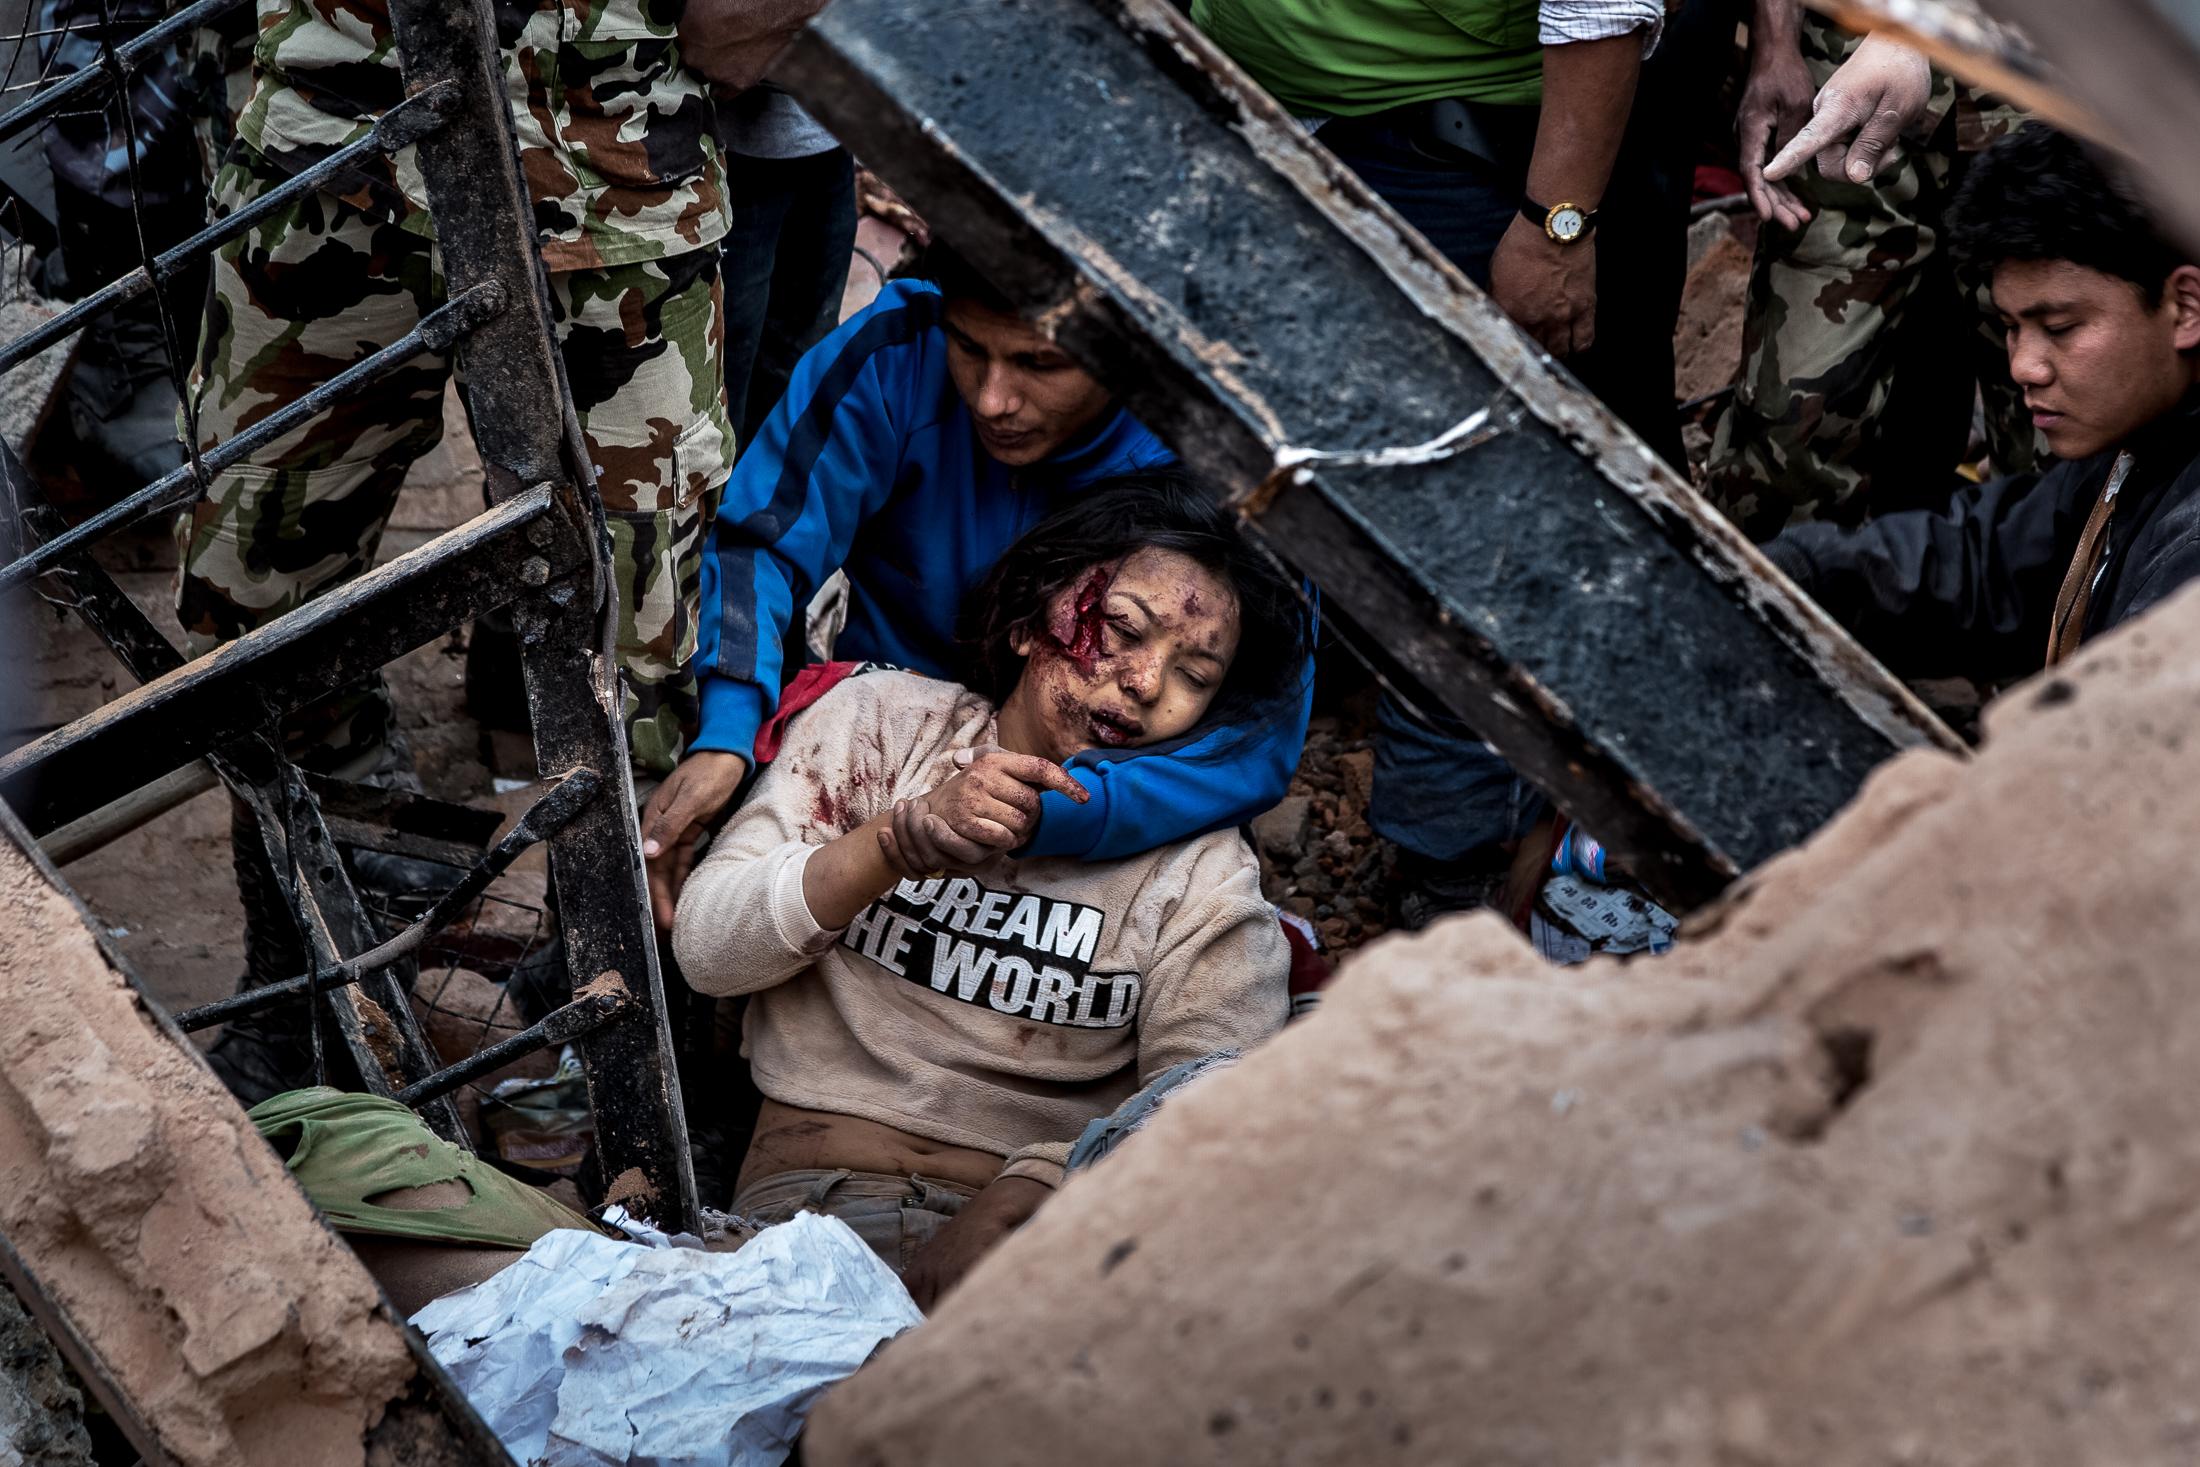 When the Earth Shook Nepal - KATHMANDU, NEPAL - APRIL 25: Emergency rescue workers and...